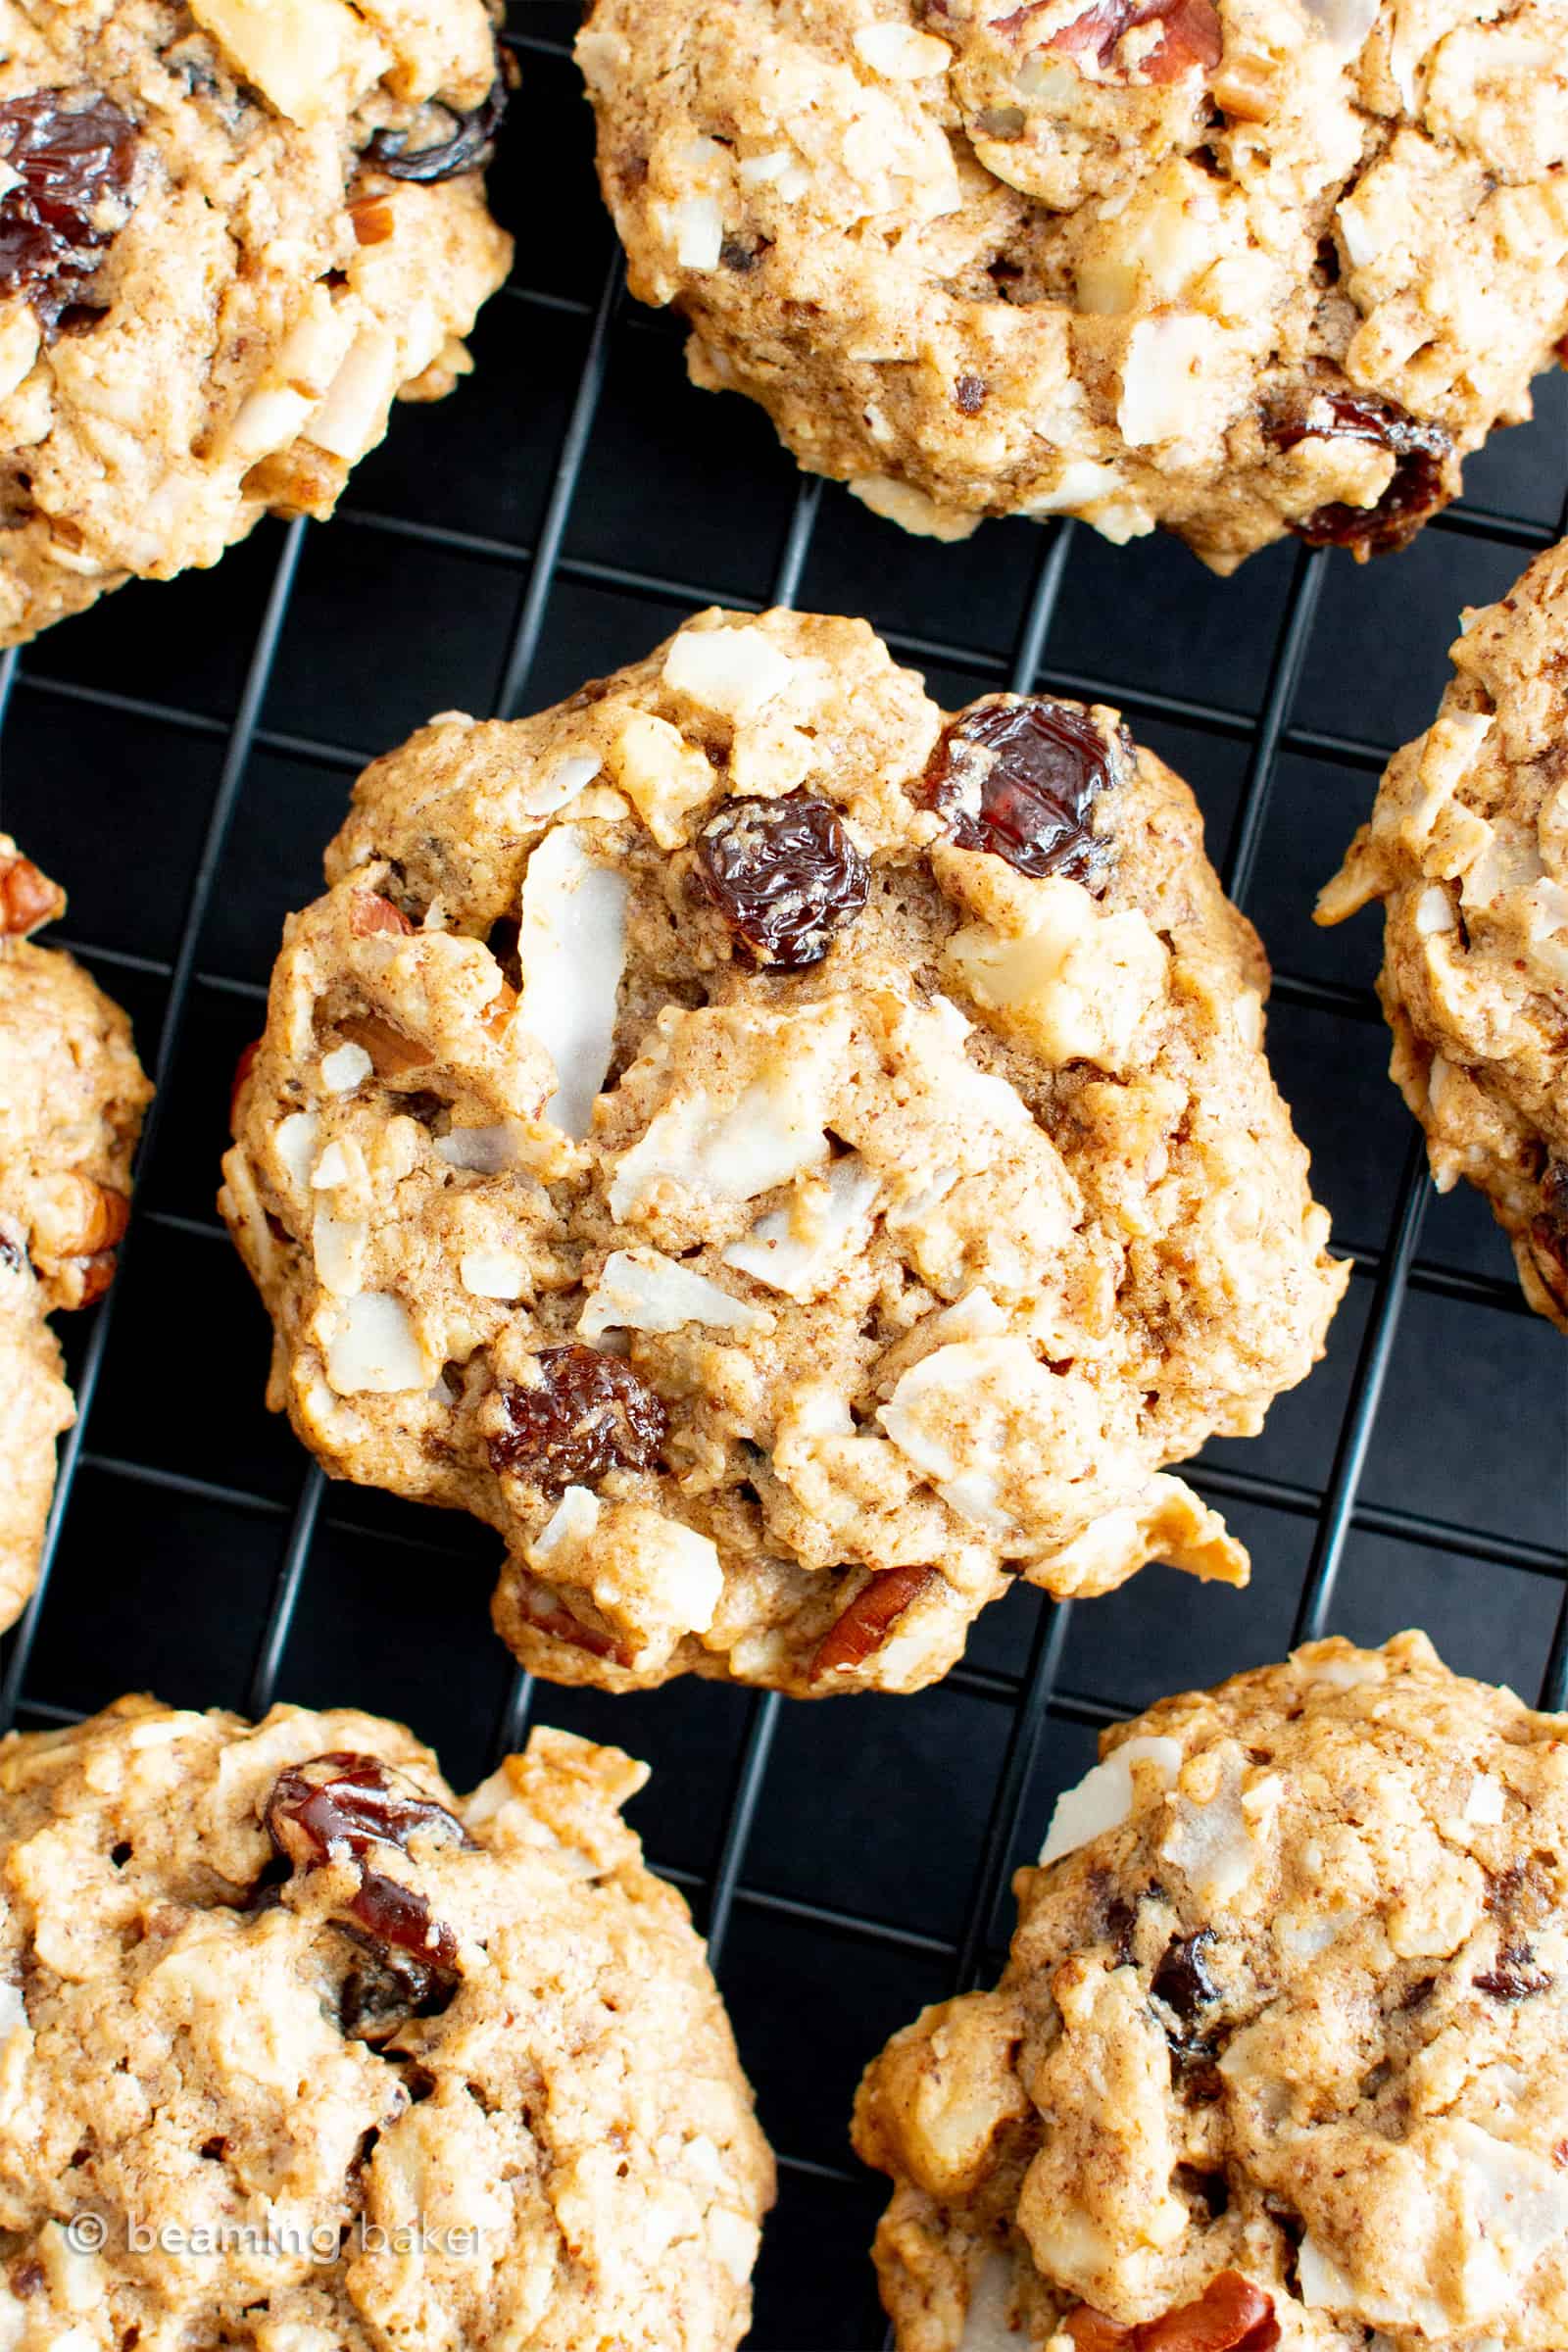 Healthy Oatmeal Coconut Cookies: delicious oatmeal coconut cookies with chewy & crispy goodness! Wonderfully healthy, vegan and gluten free. #healthy #coconut #oatmeal #cookies #vegan #glutenfree | Recipe at BeamingBaker.com